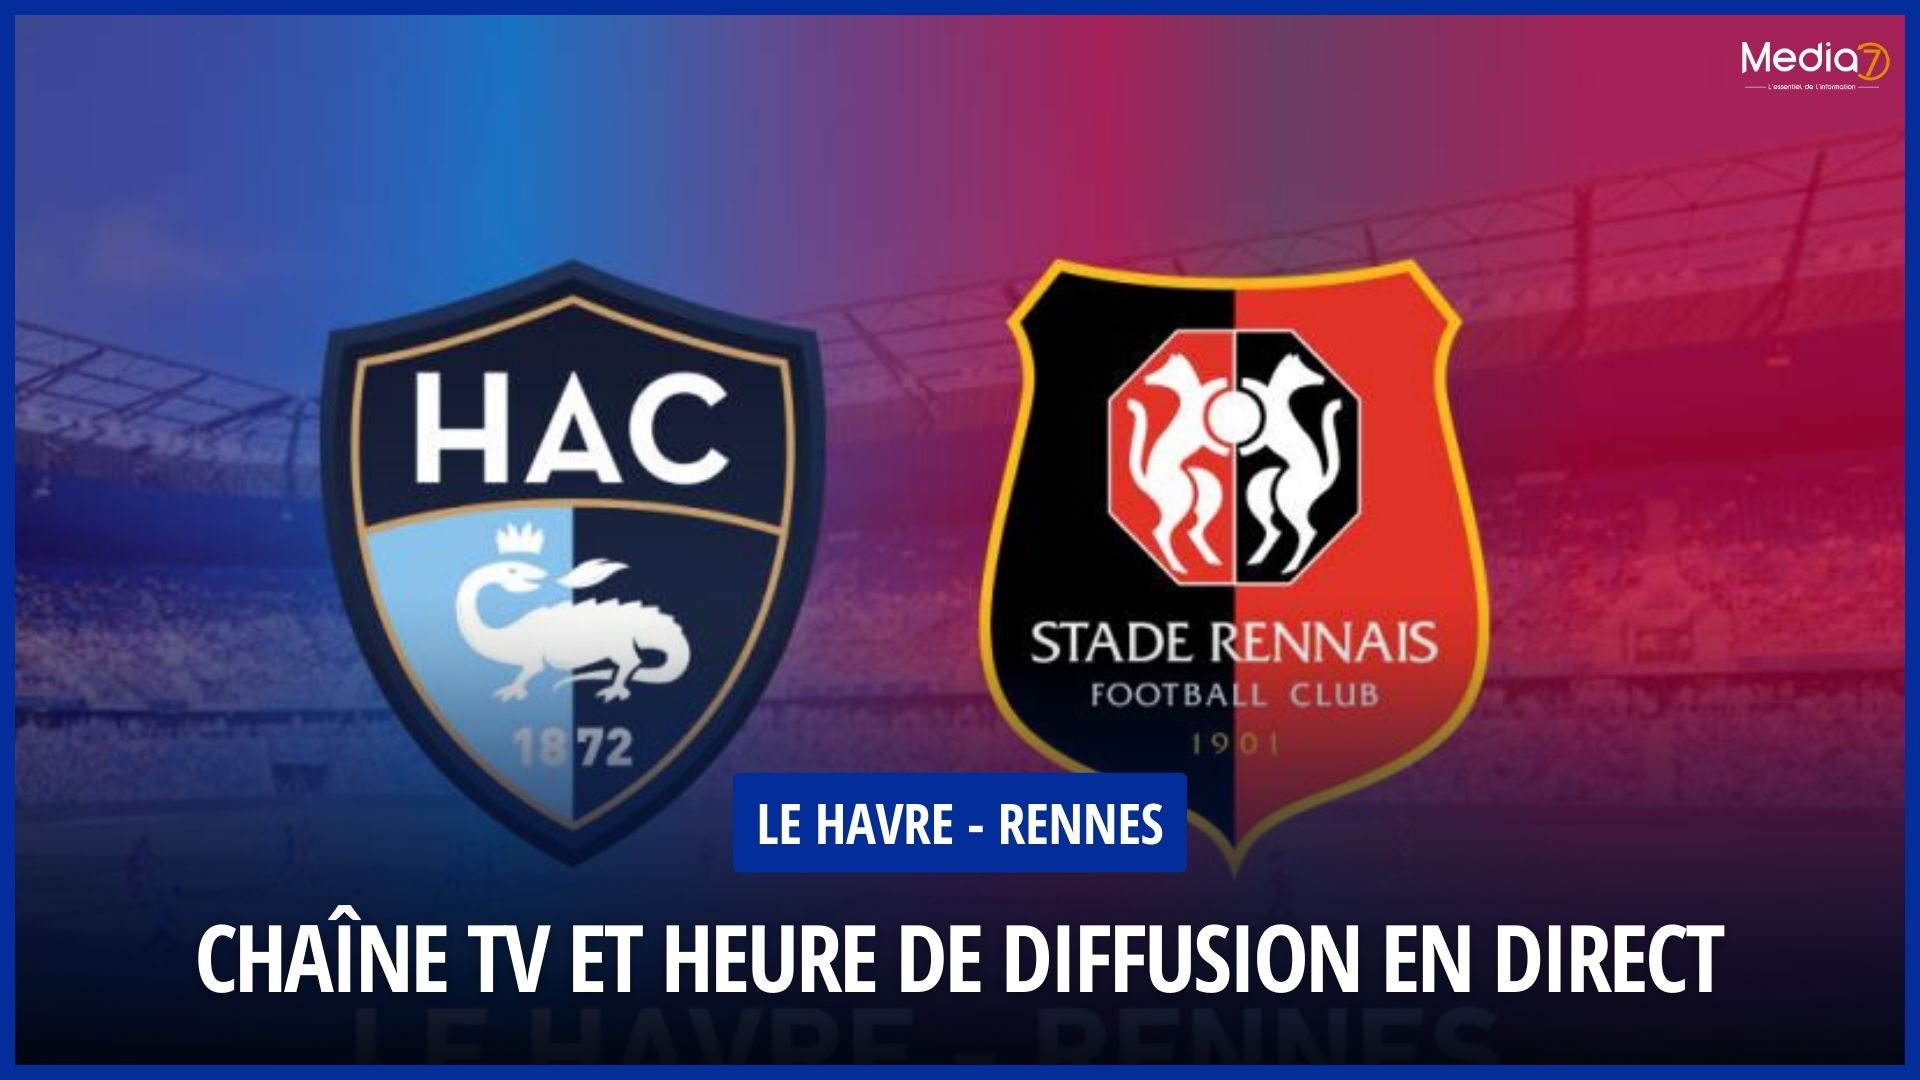 Le Havre - Rennes